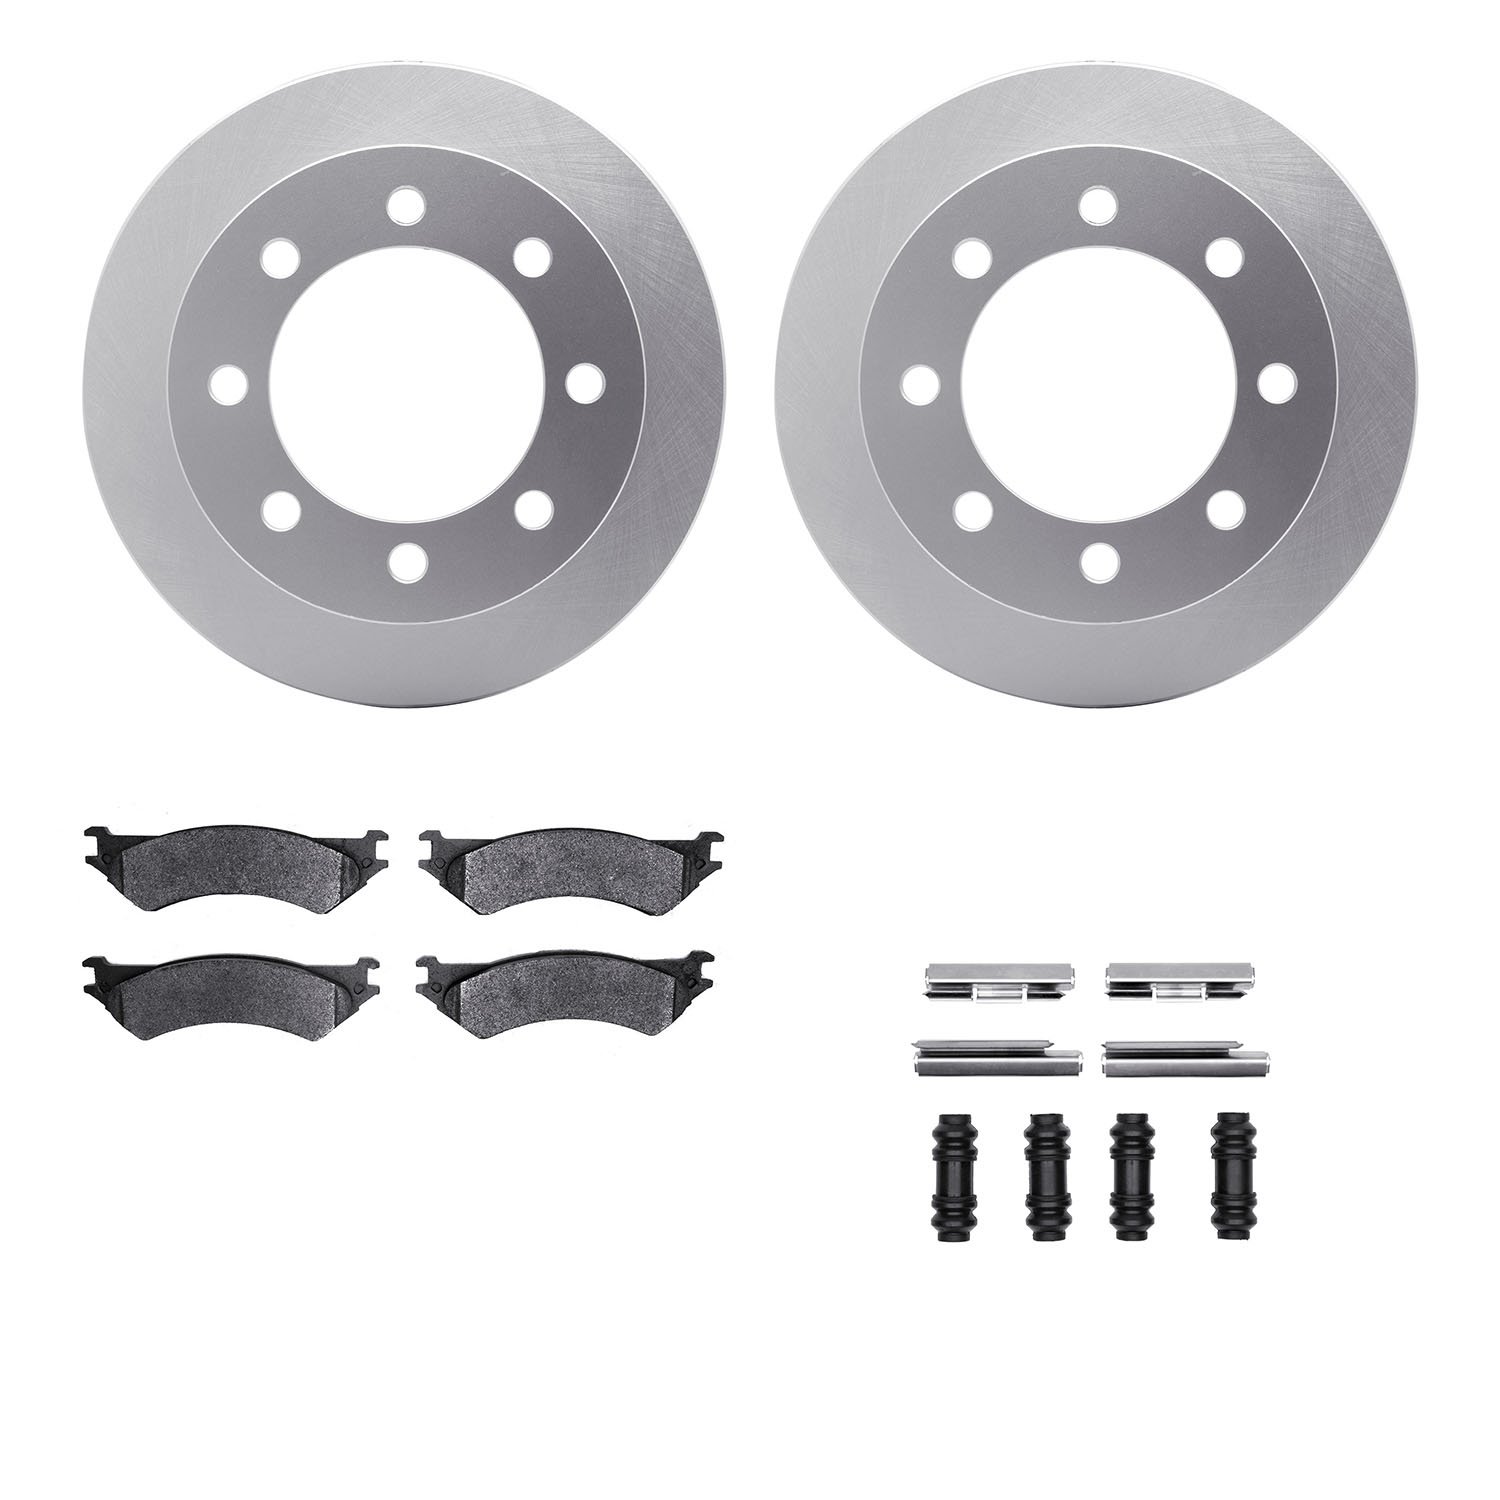 4412-54029 Geospec Brake Rotors with Ultimate-Duty Brake Pads & Hardware, 1999-2007 Ford/Lincoln/Mercury/Mazda, Position: Rear